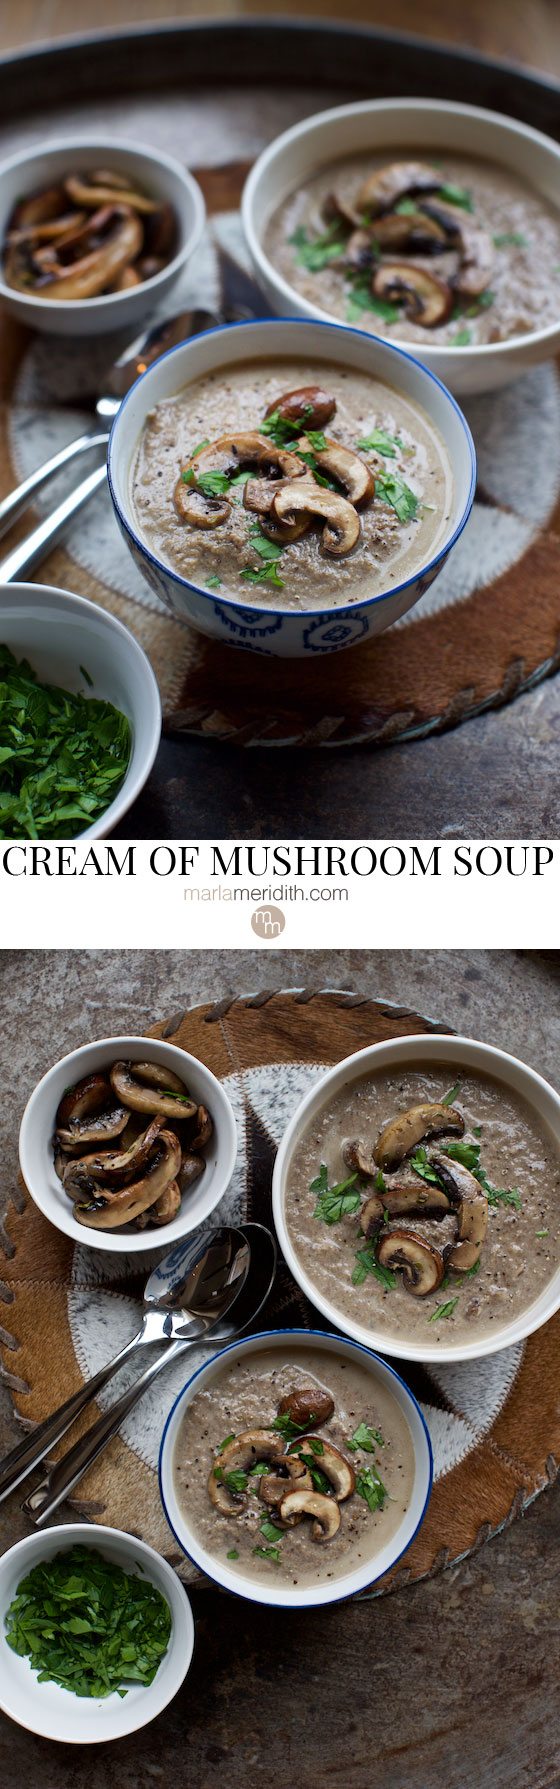 When the weather cools down, this CREAM OF MUSHROOM SOUP will warm you up! #recipe on MarlaMeridith.com ( @marlameridith )